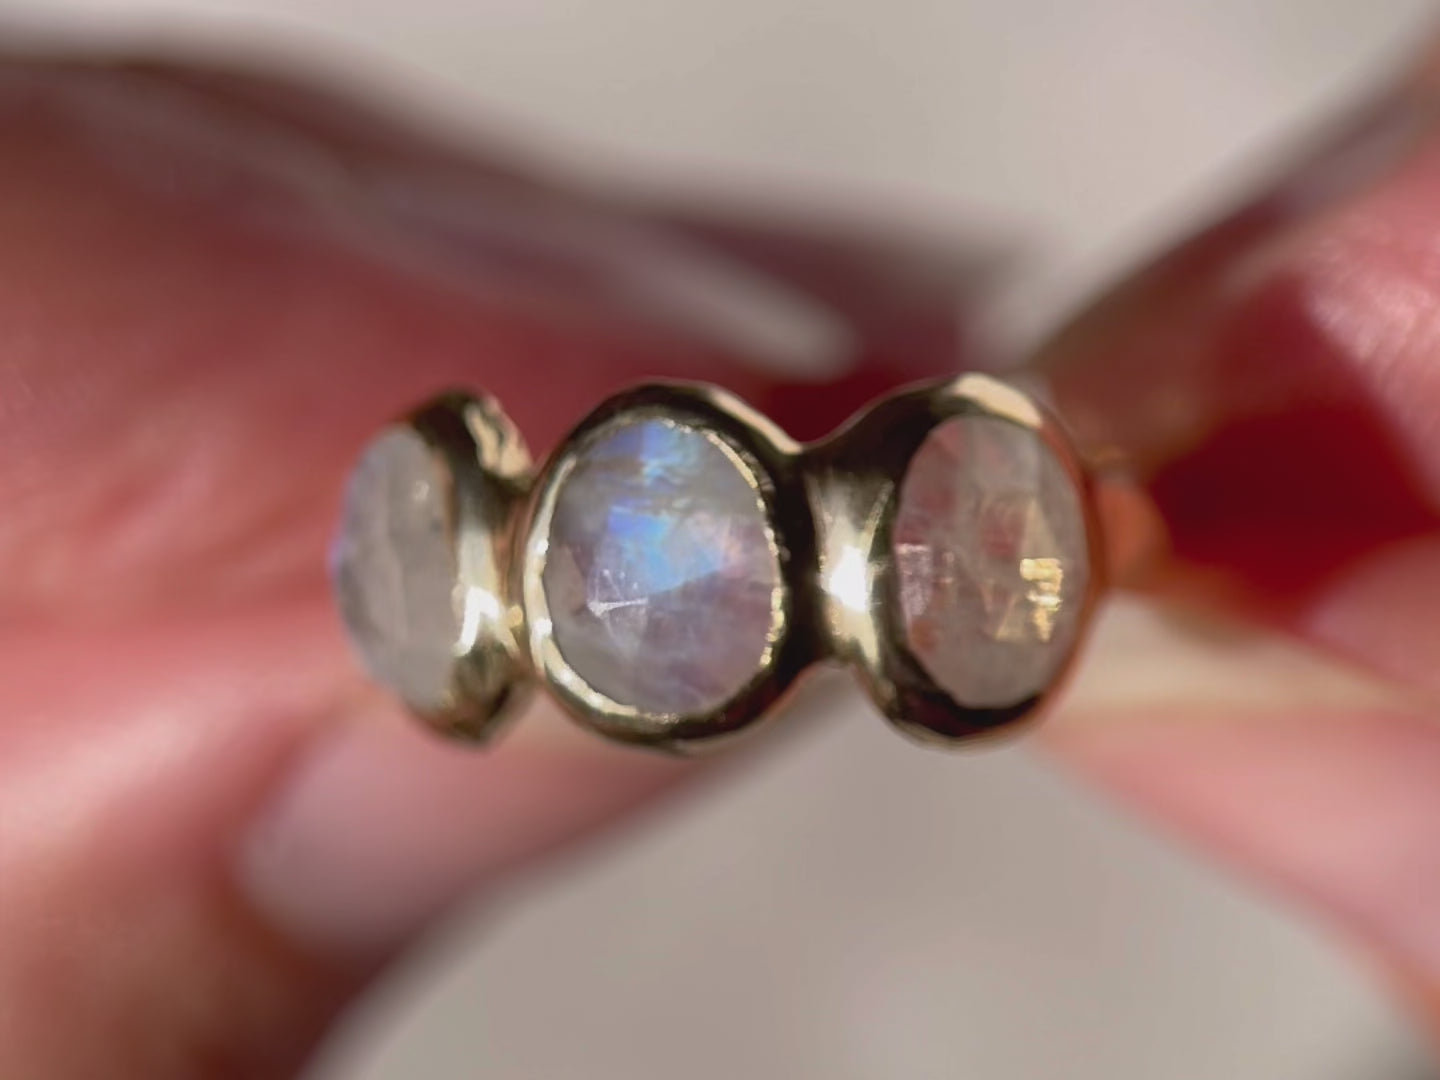 A close up video of three rose cut moonstones that are bezel set in 14k gold across the front of an organic band.